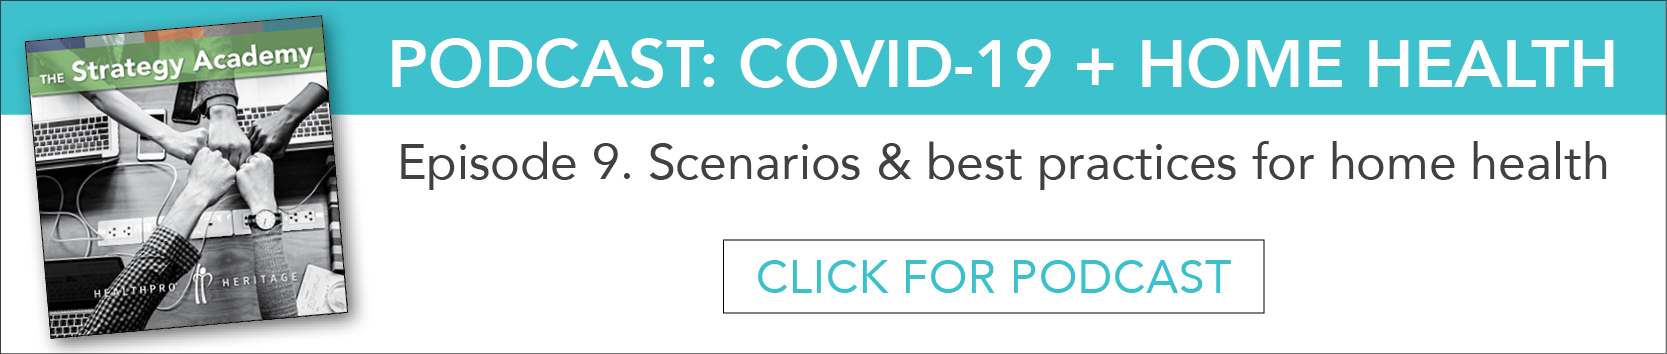 Podcast 9_COVID-19 + Home Health Considerations